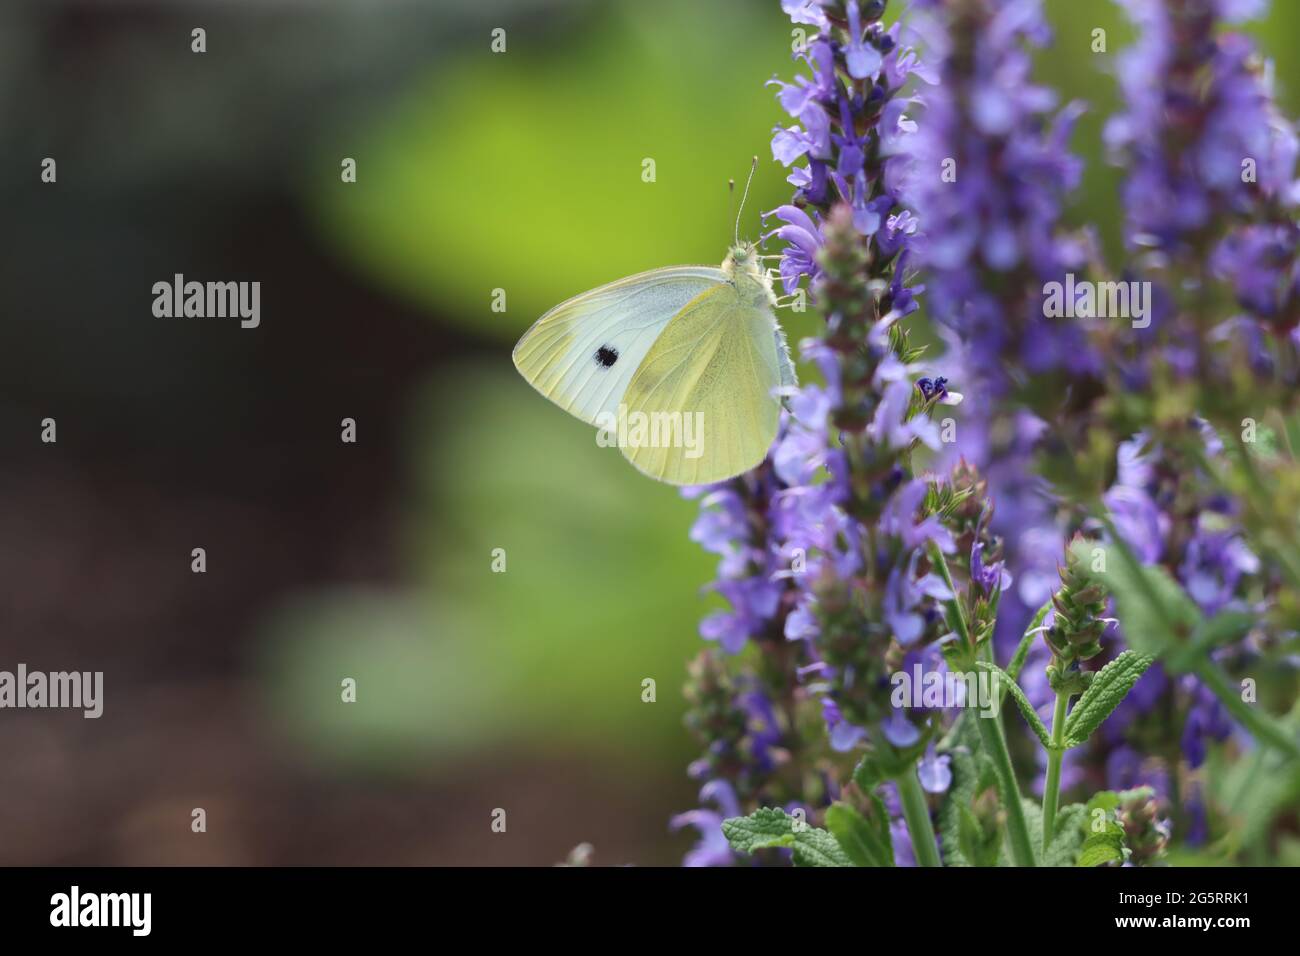 Cabbage white butterfly on purple wood sage flowers Stock Photo